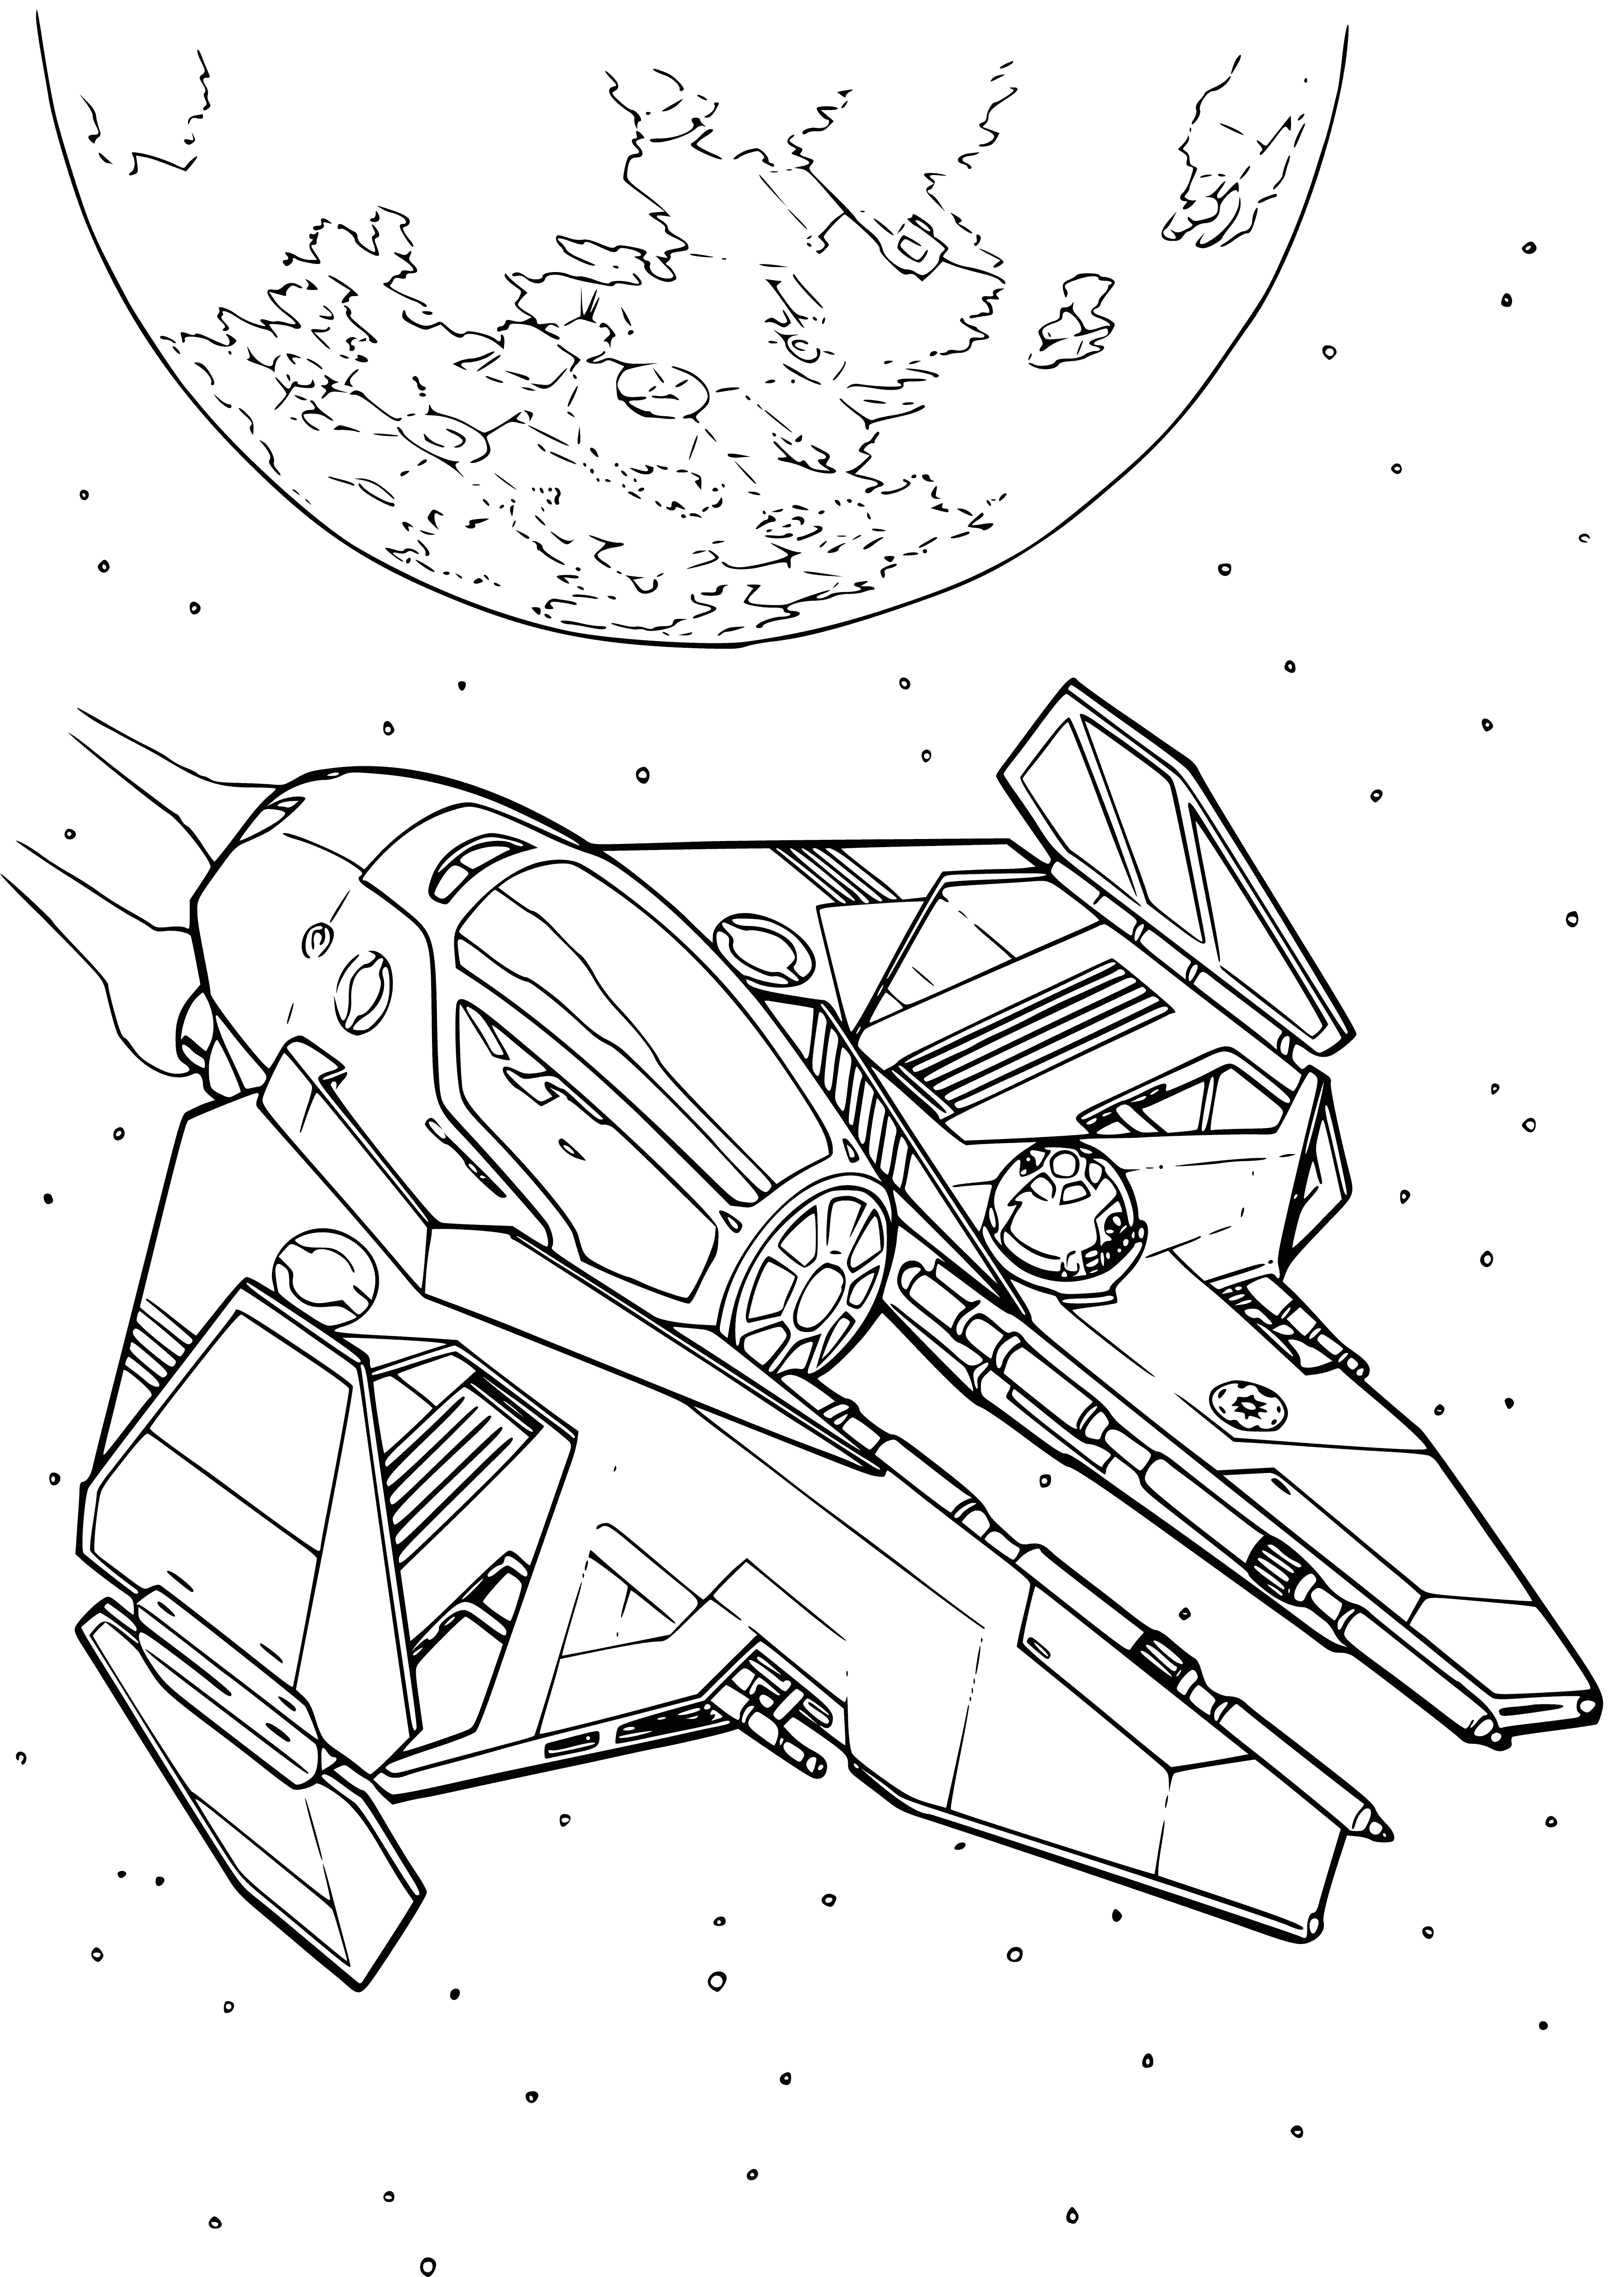 coloring page: Alien battle scene: large spaceship with small ships attacking & dazzling light in centre of page.